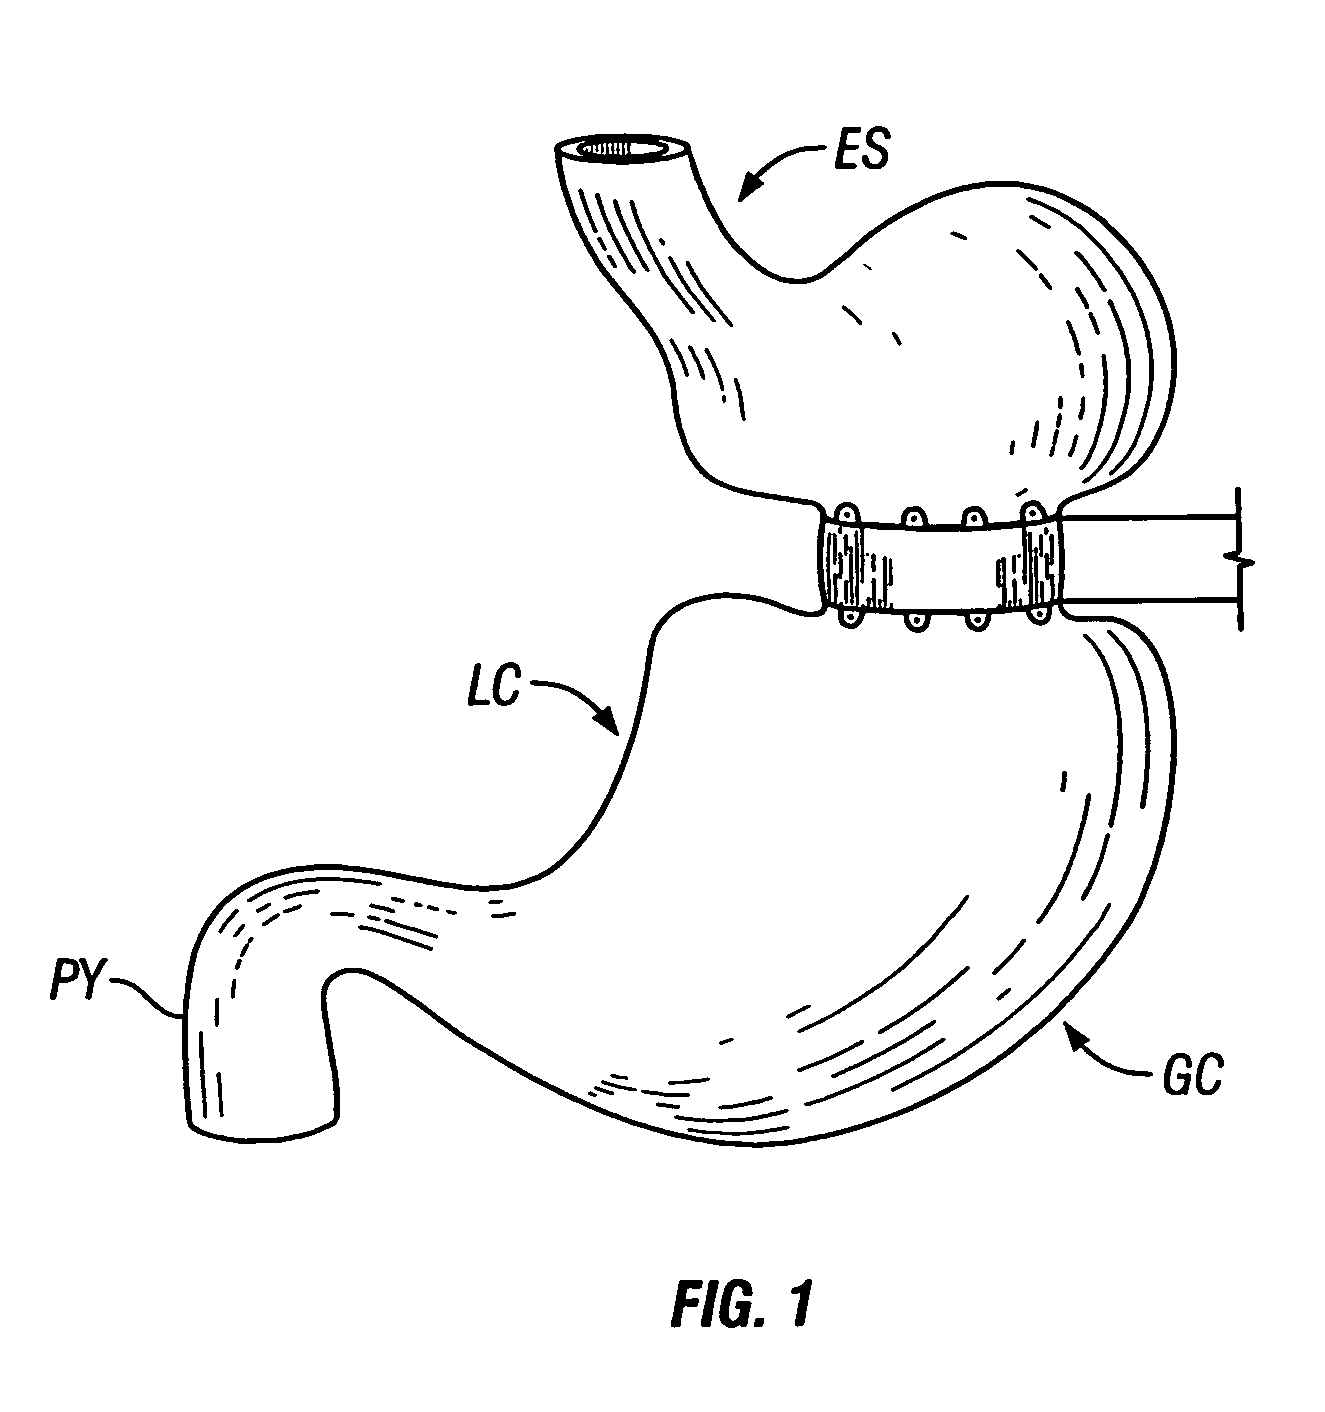 Method and device for use in endoscopic organ procedures